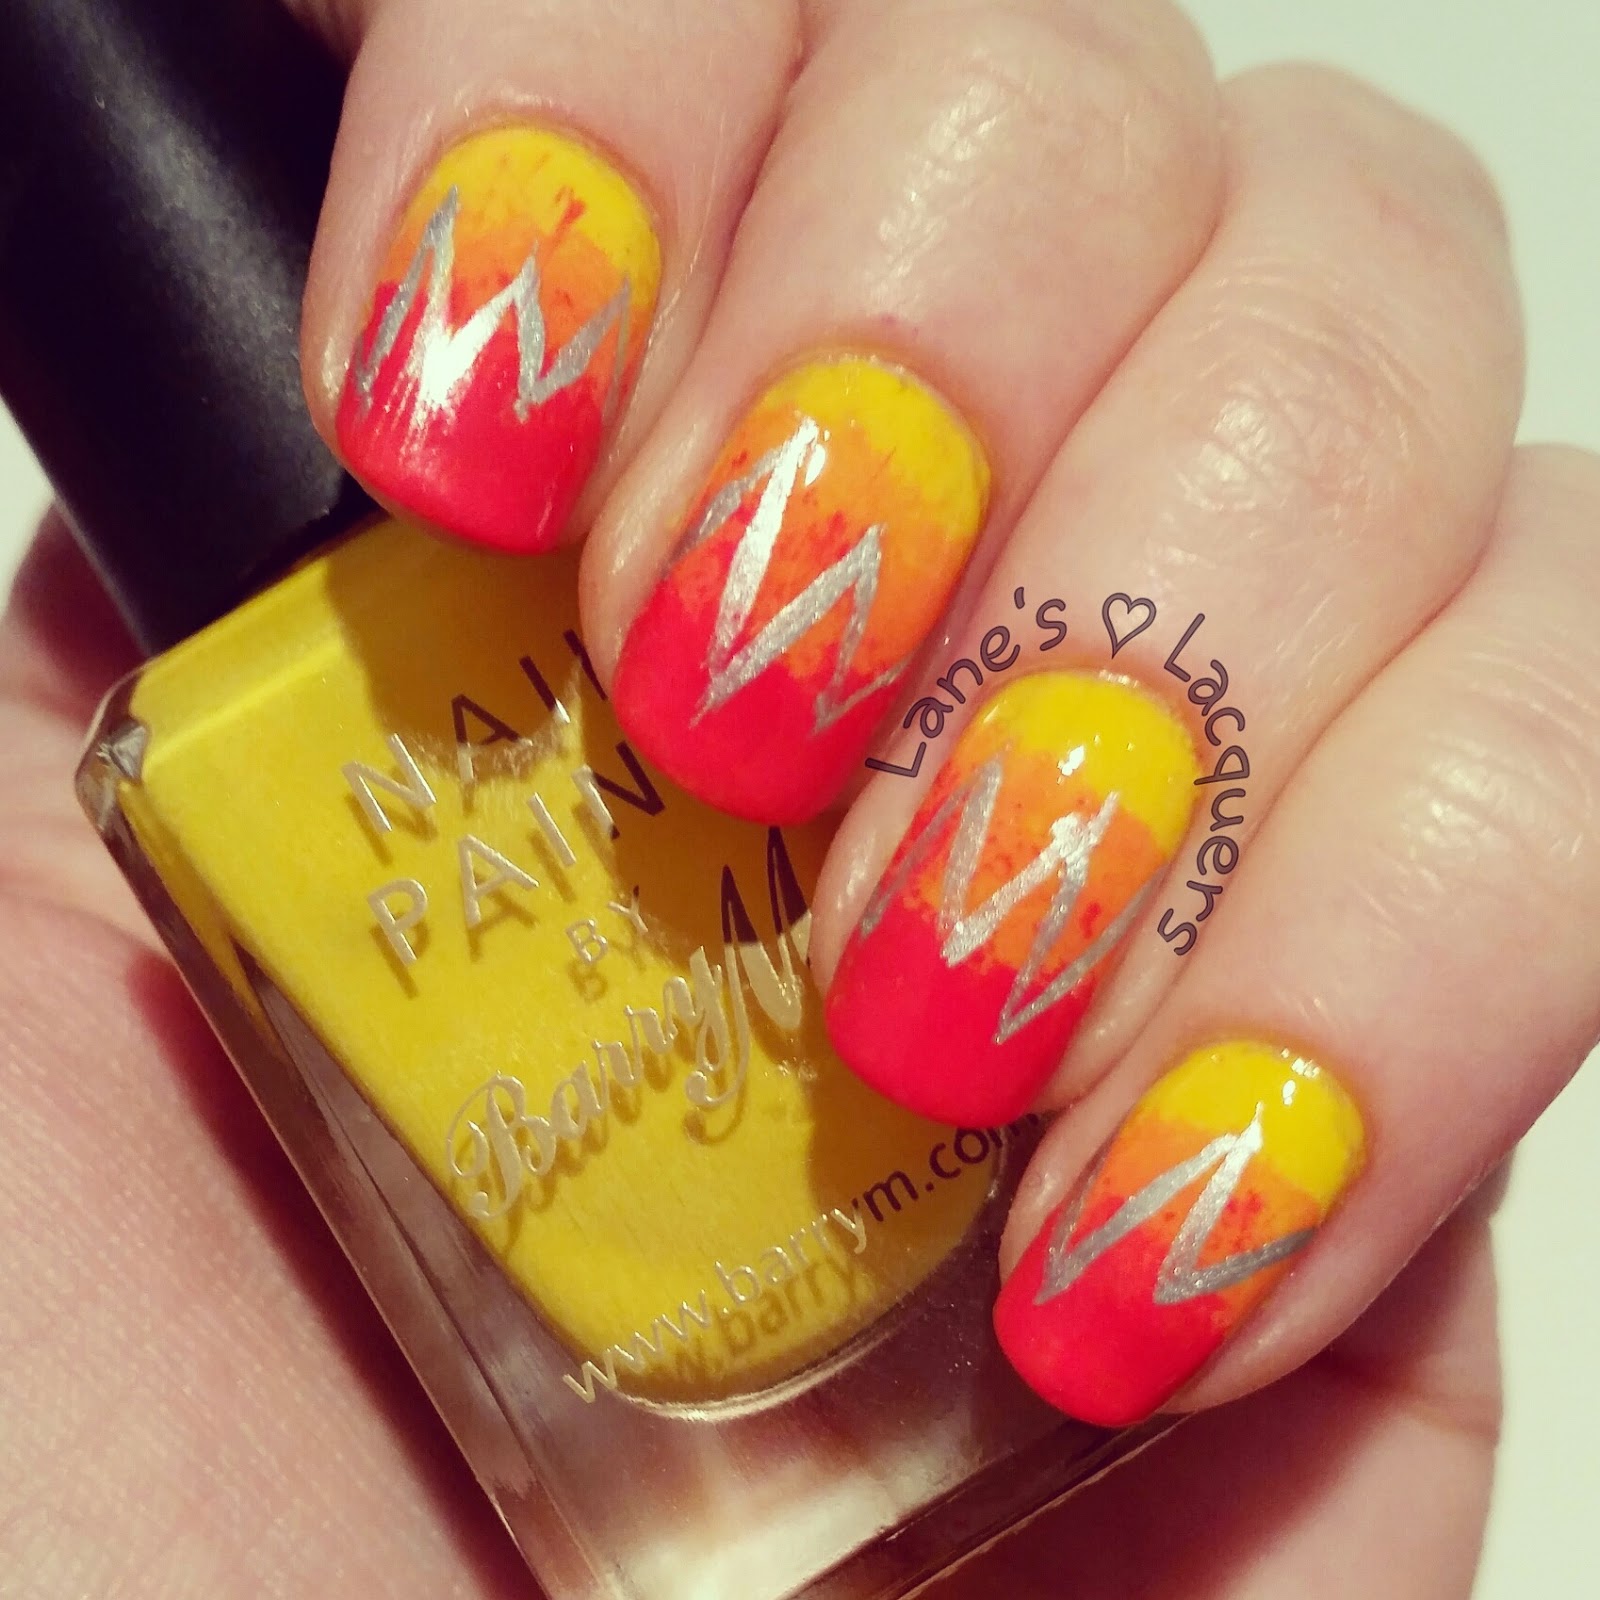 Lane's Lacquers: 31 Day Challenge 2015: Fire